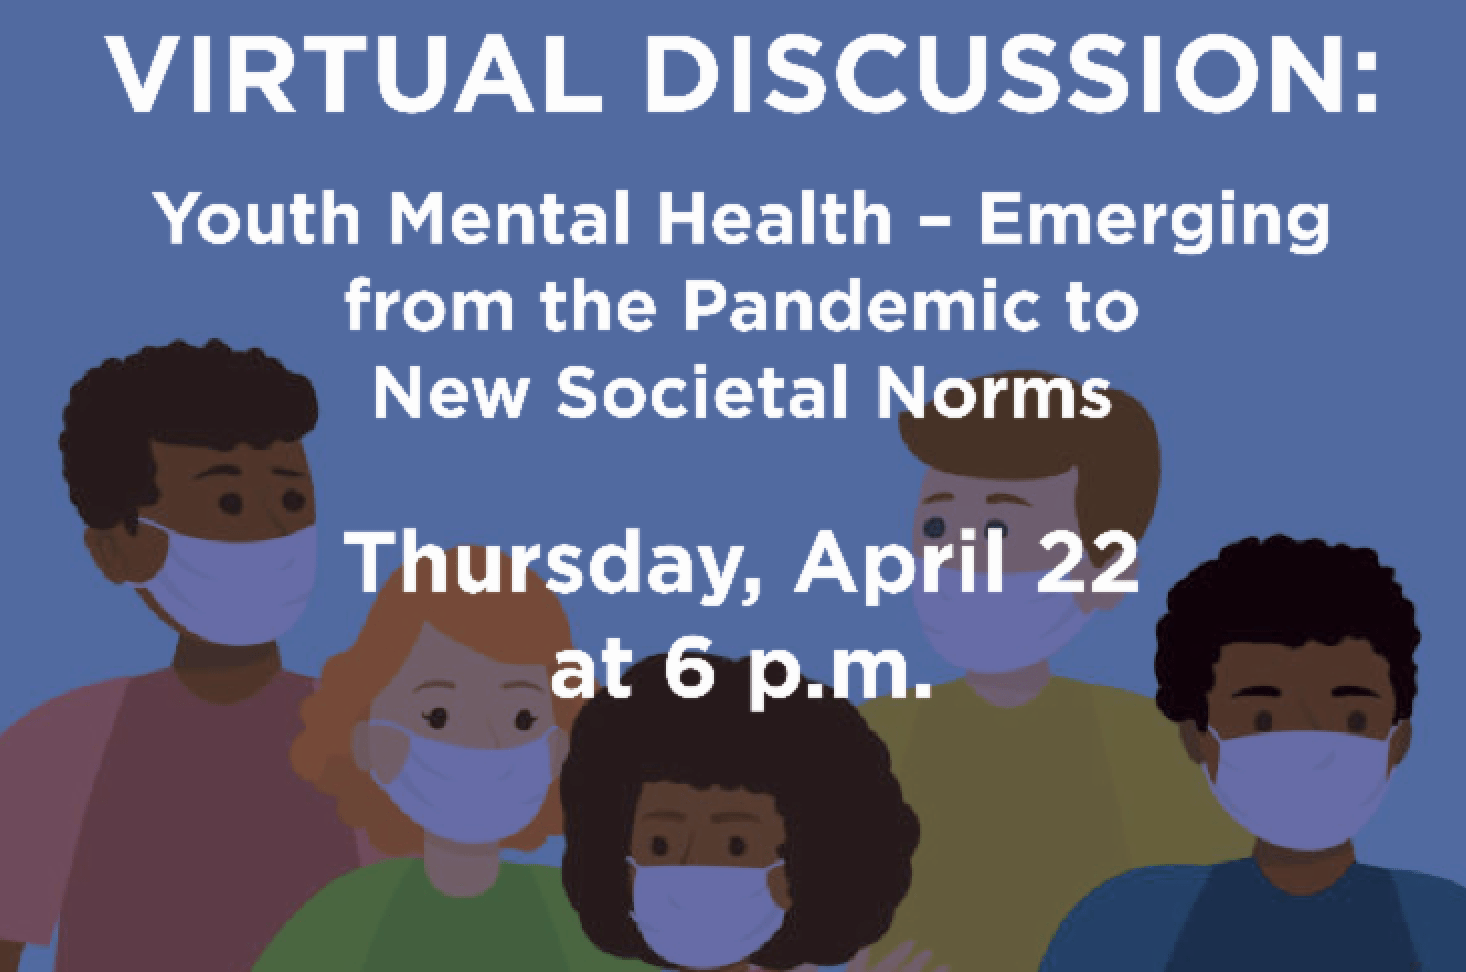 Newport News to host Youth Mental Health Discussion, April 22